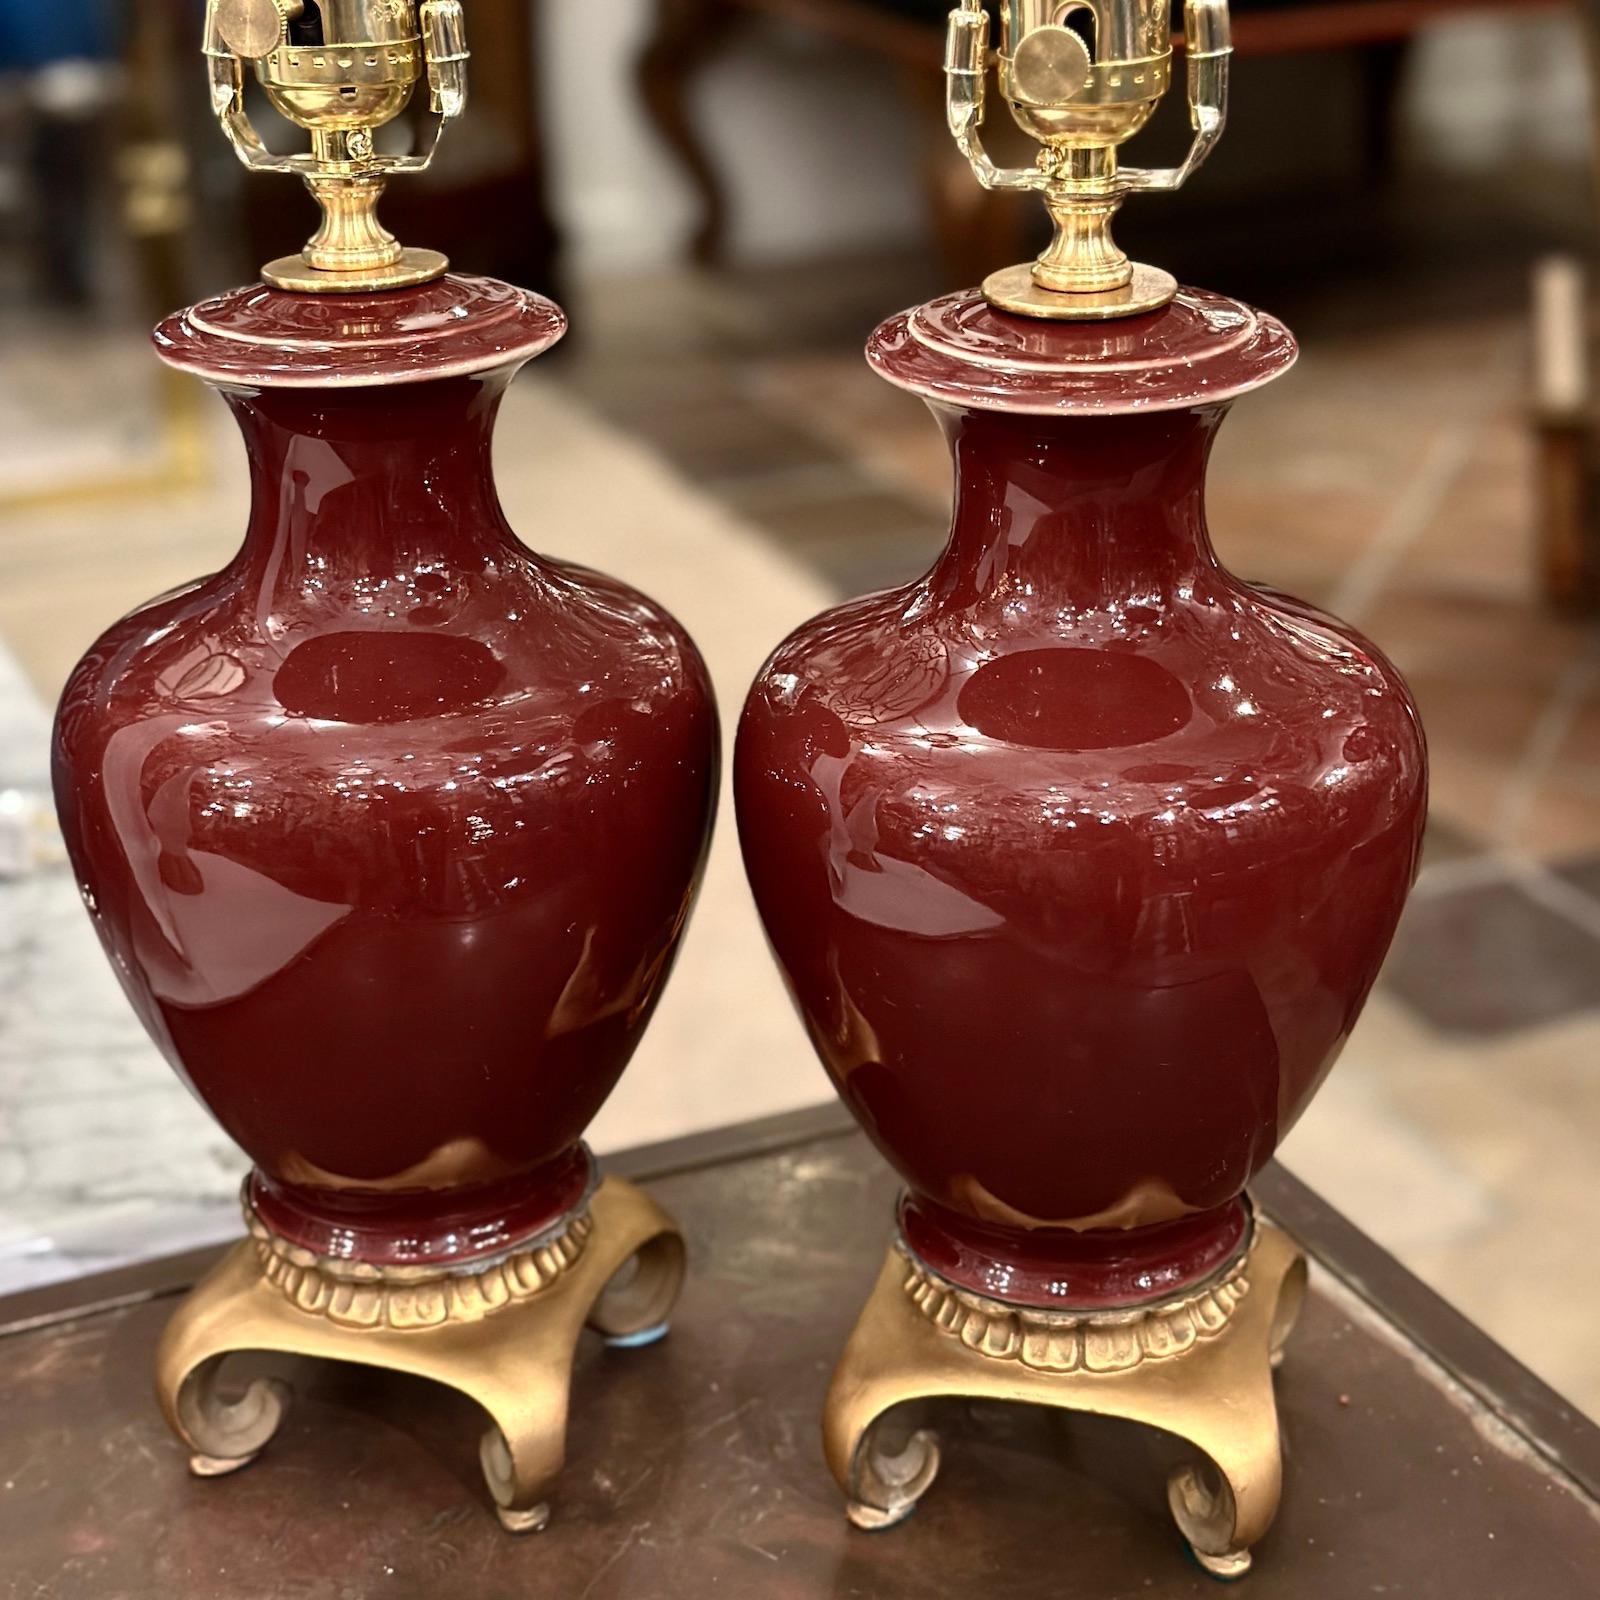 Pair of French circa 1920s porcelain table lamps with gilt bases.

Measurements:
Height of body: 12